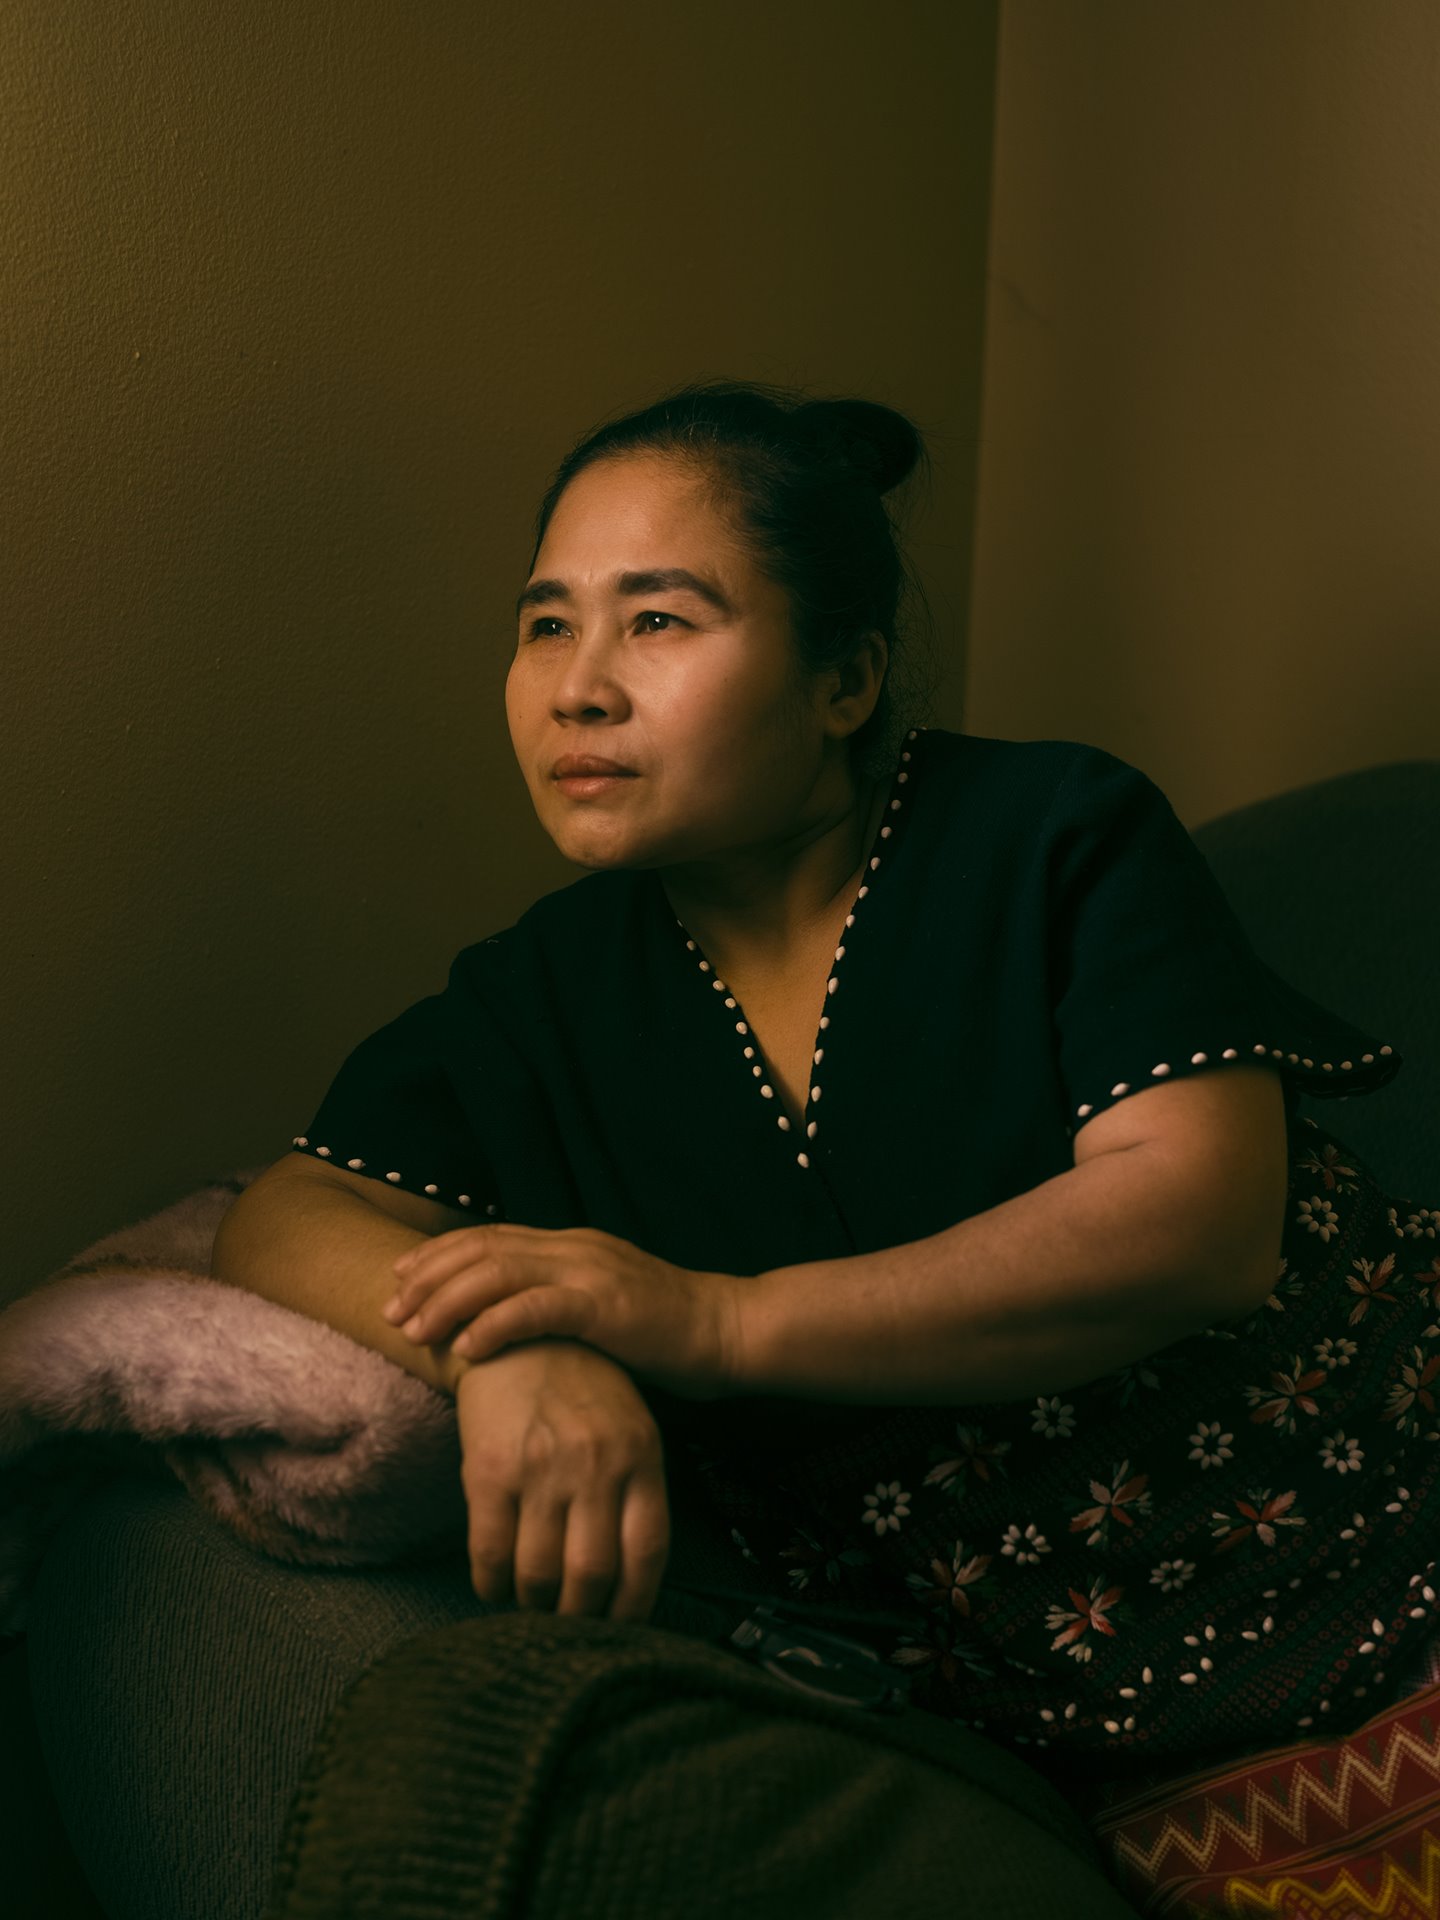 Aye Sway is a member of the Karen ethnic group, who have experienced persecution from the Myanmar government, is pictured at home in Omaha, Nebraska, USA. She lived in a refugee camp in Thailand, before moving to the US in 2018. At the time of the COVID-19 outbreak she was working in a chicken processing plant in Lincoln, Nebraska, but says she was scared to go to work because so many of her friends became severely ill.&nbsp;